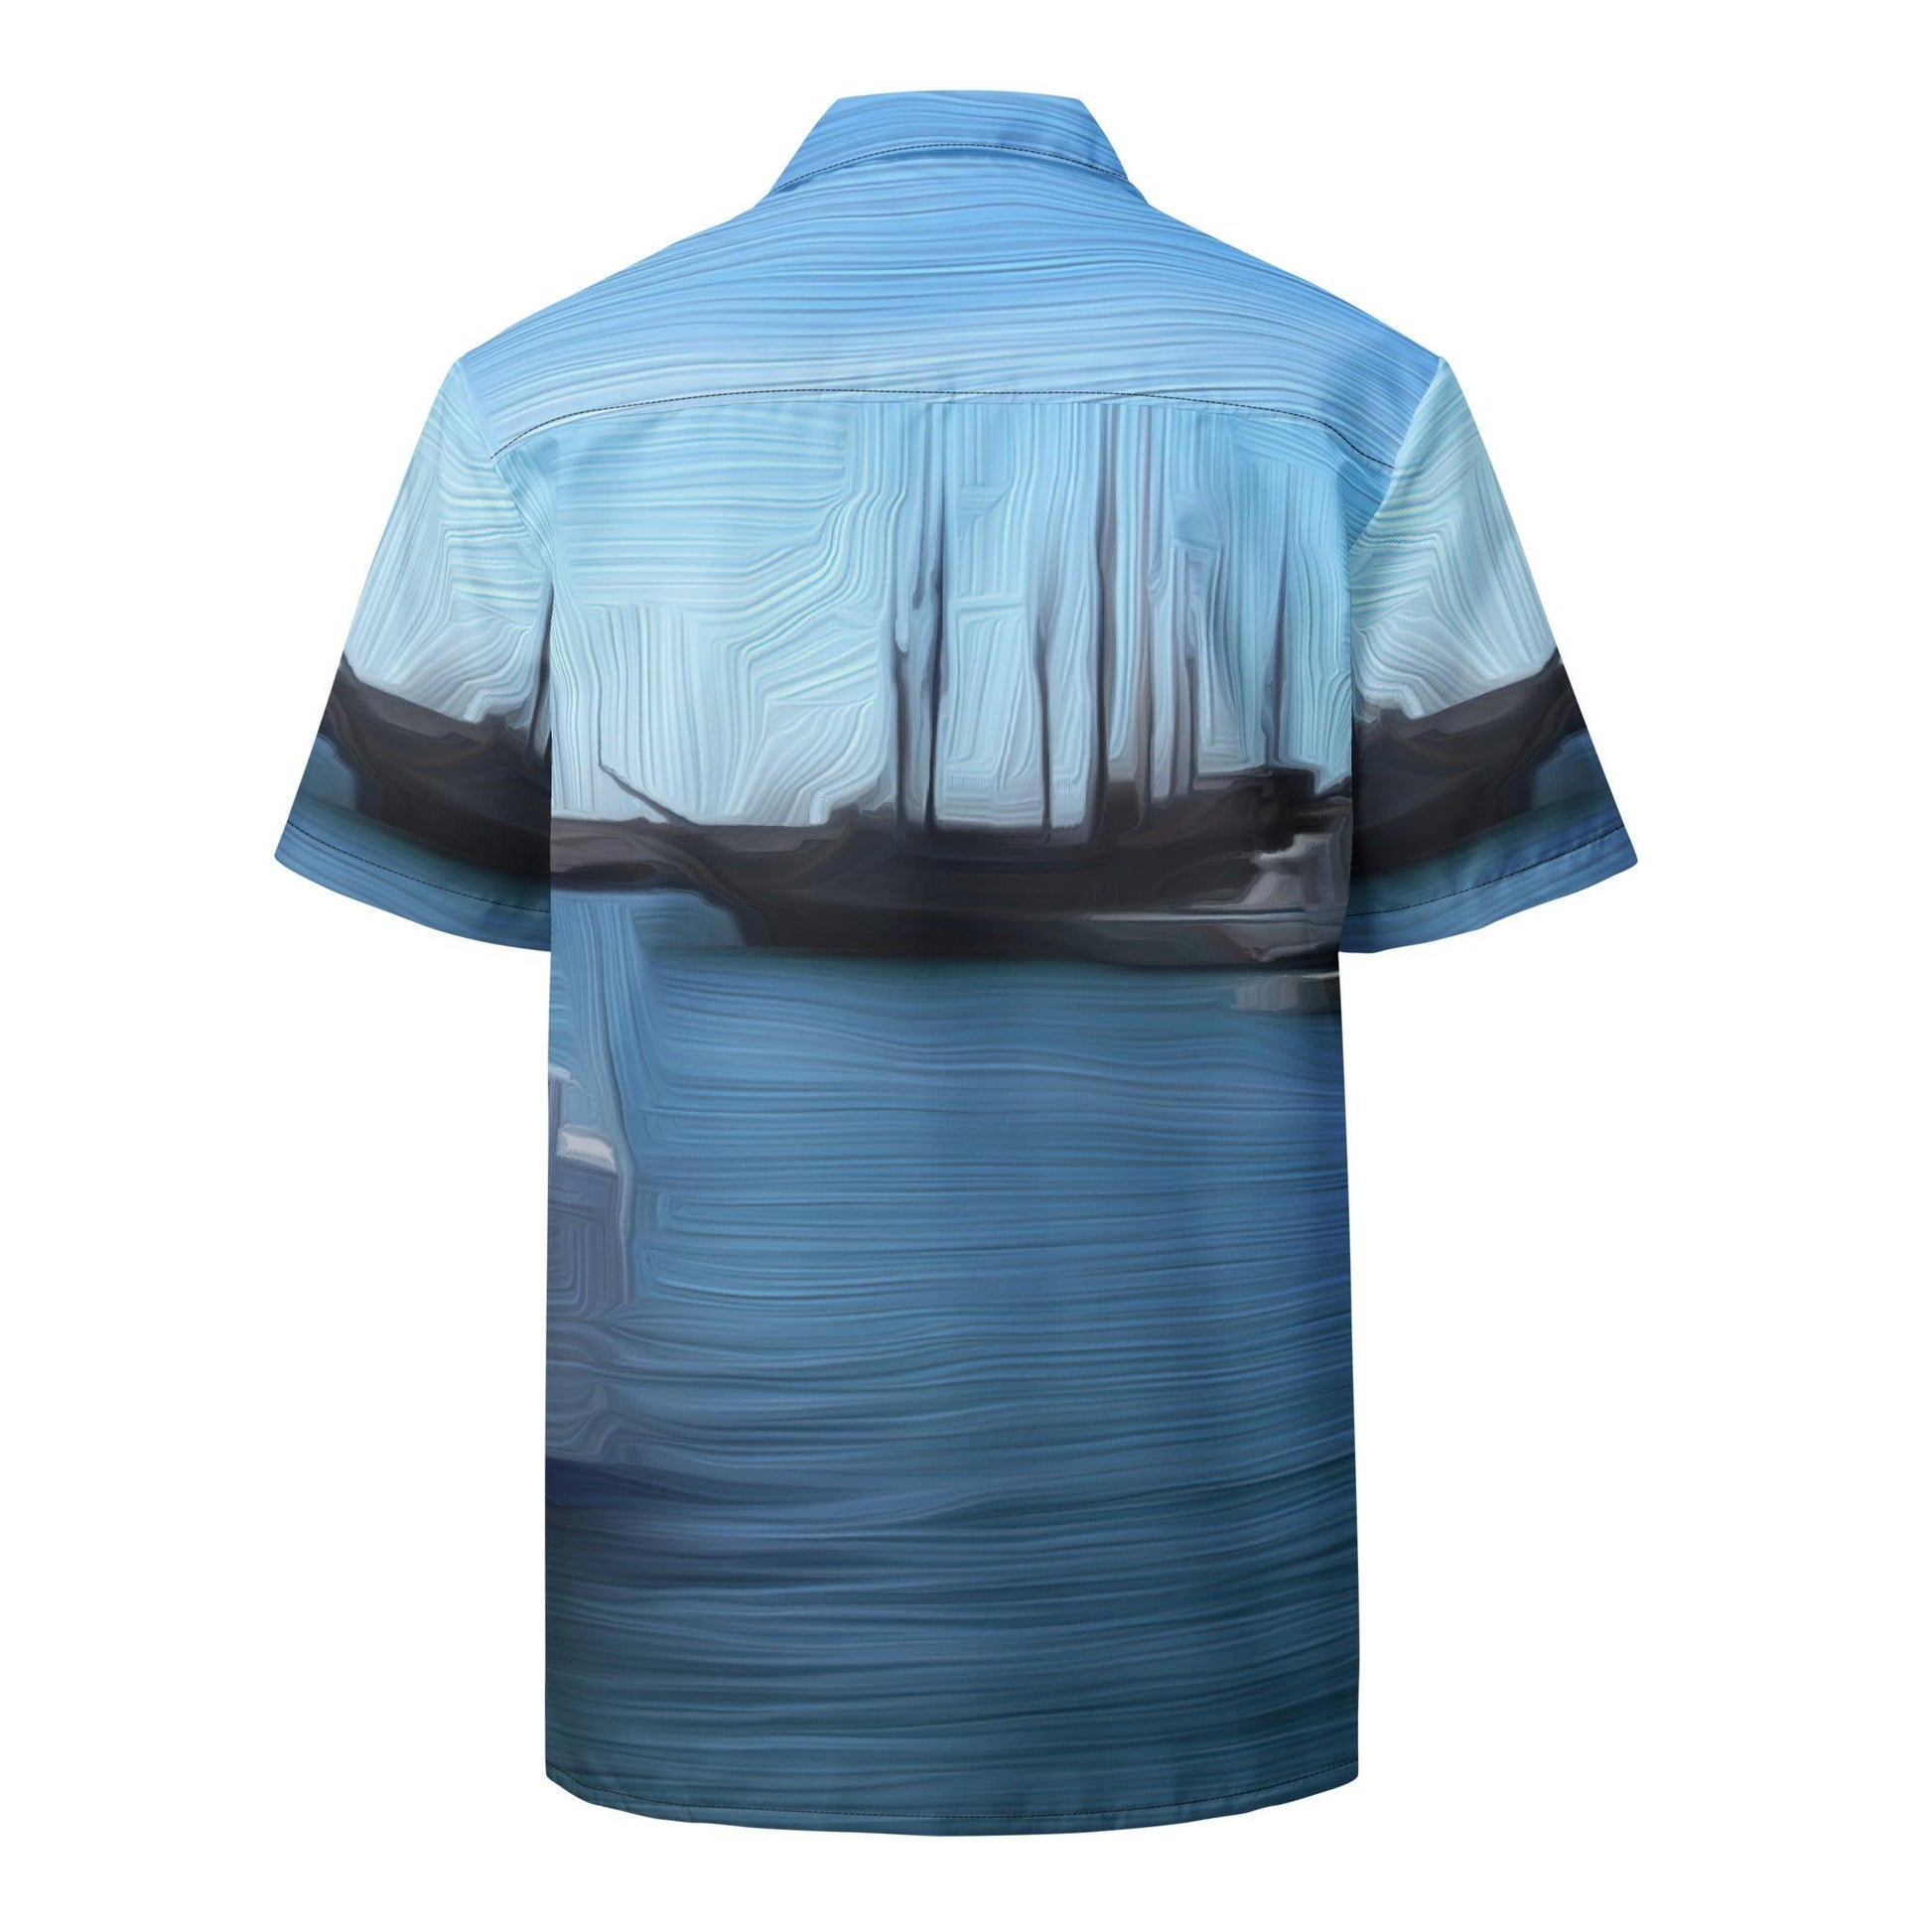 The Sleeping Yachts (at Morning) - Unisex Button Shirt - iSAW Company